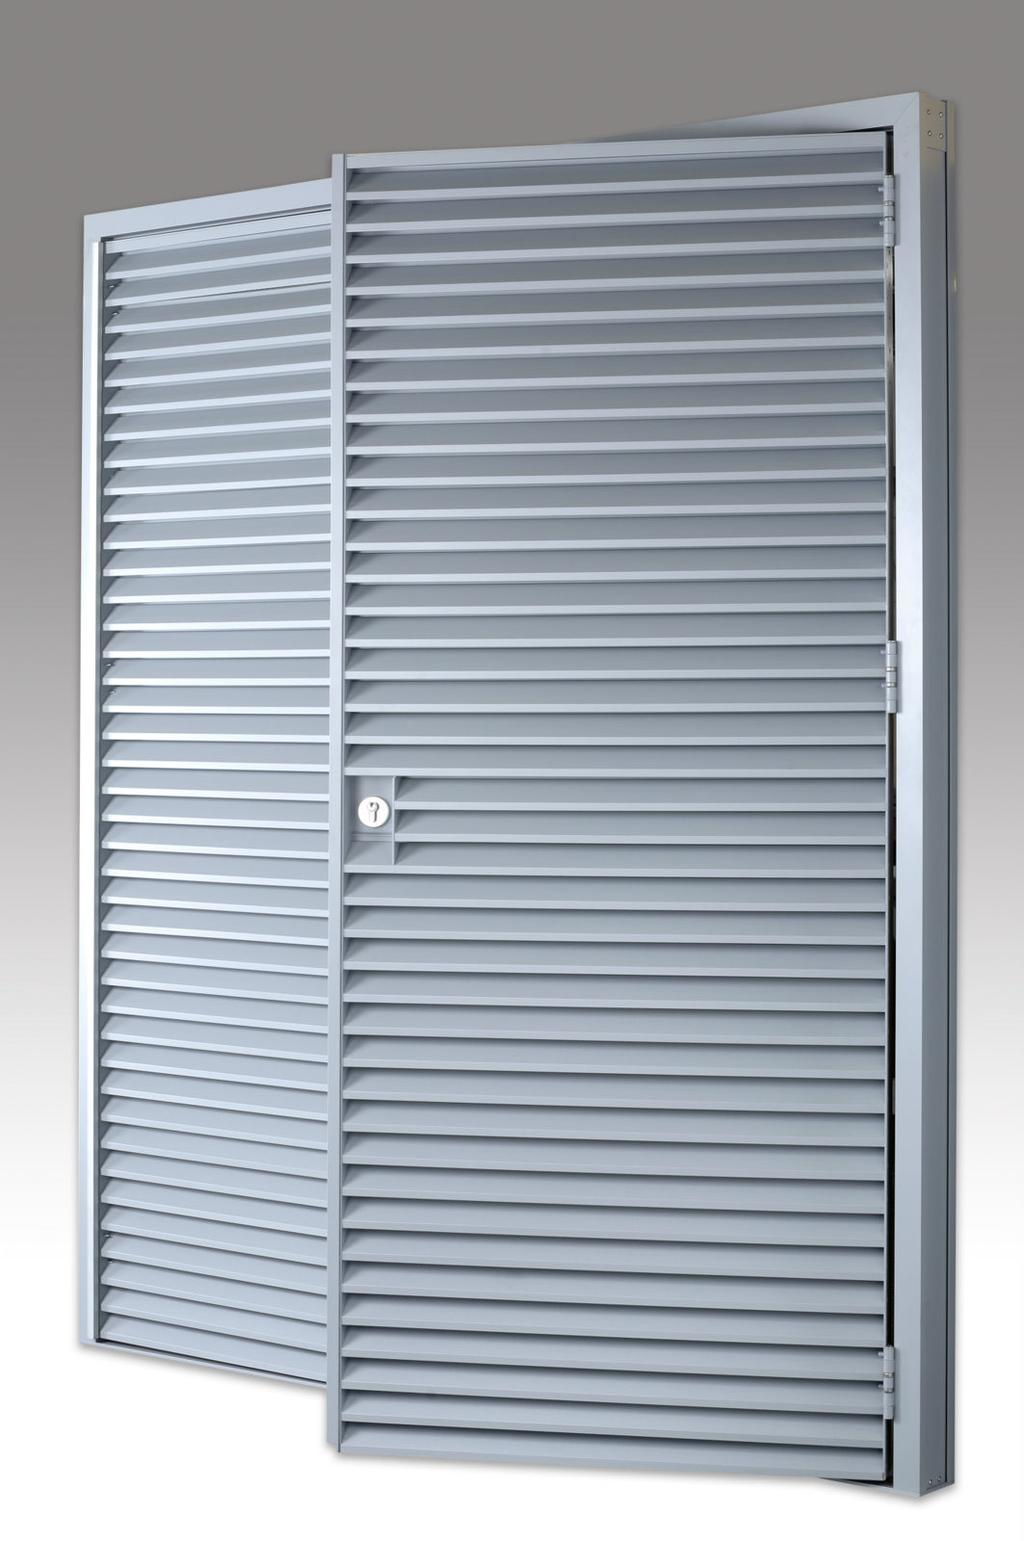 BL-LD 38 Series Fully Louvred Doors BL-LD Series Fully Louvre Doors Materials Aluminium extrusions type 6063-T6 to BS1474 having a minimum thickness of 1.6mm.